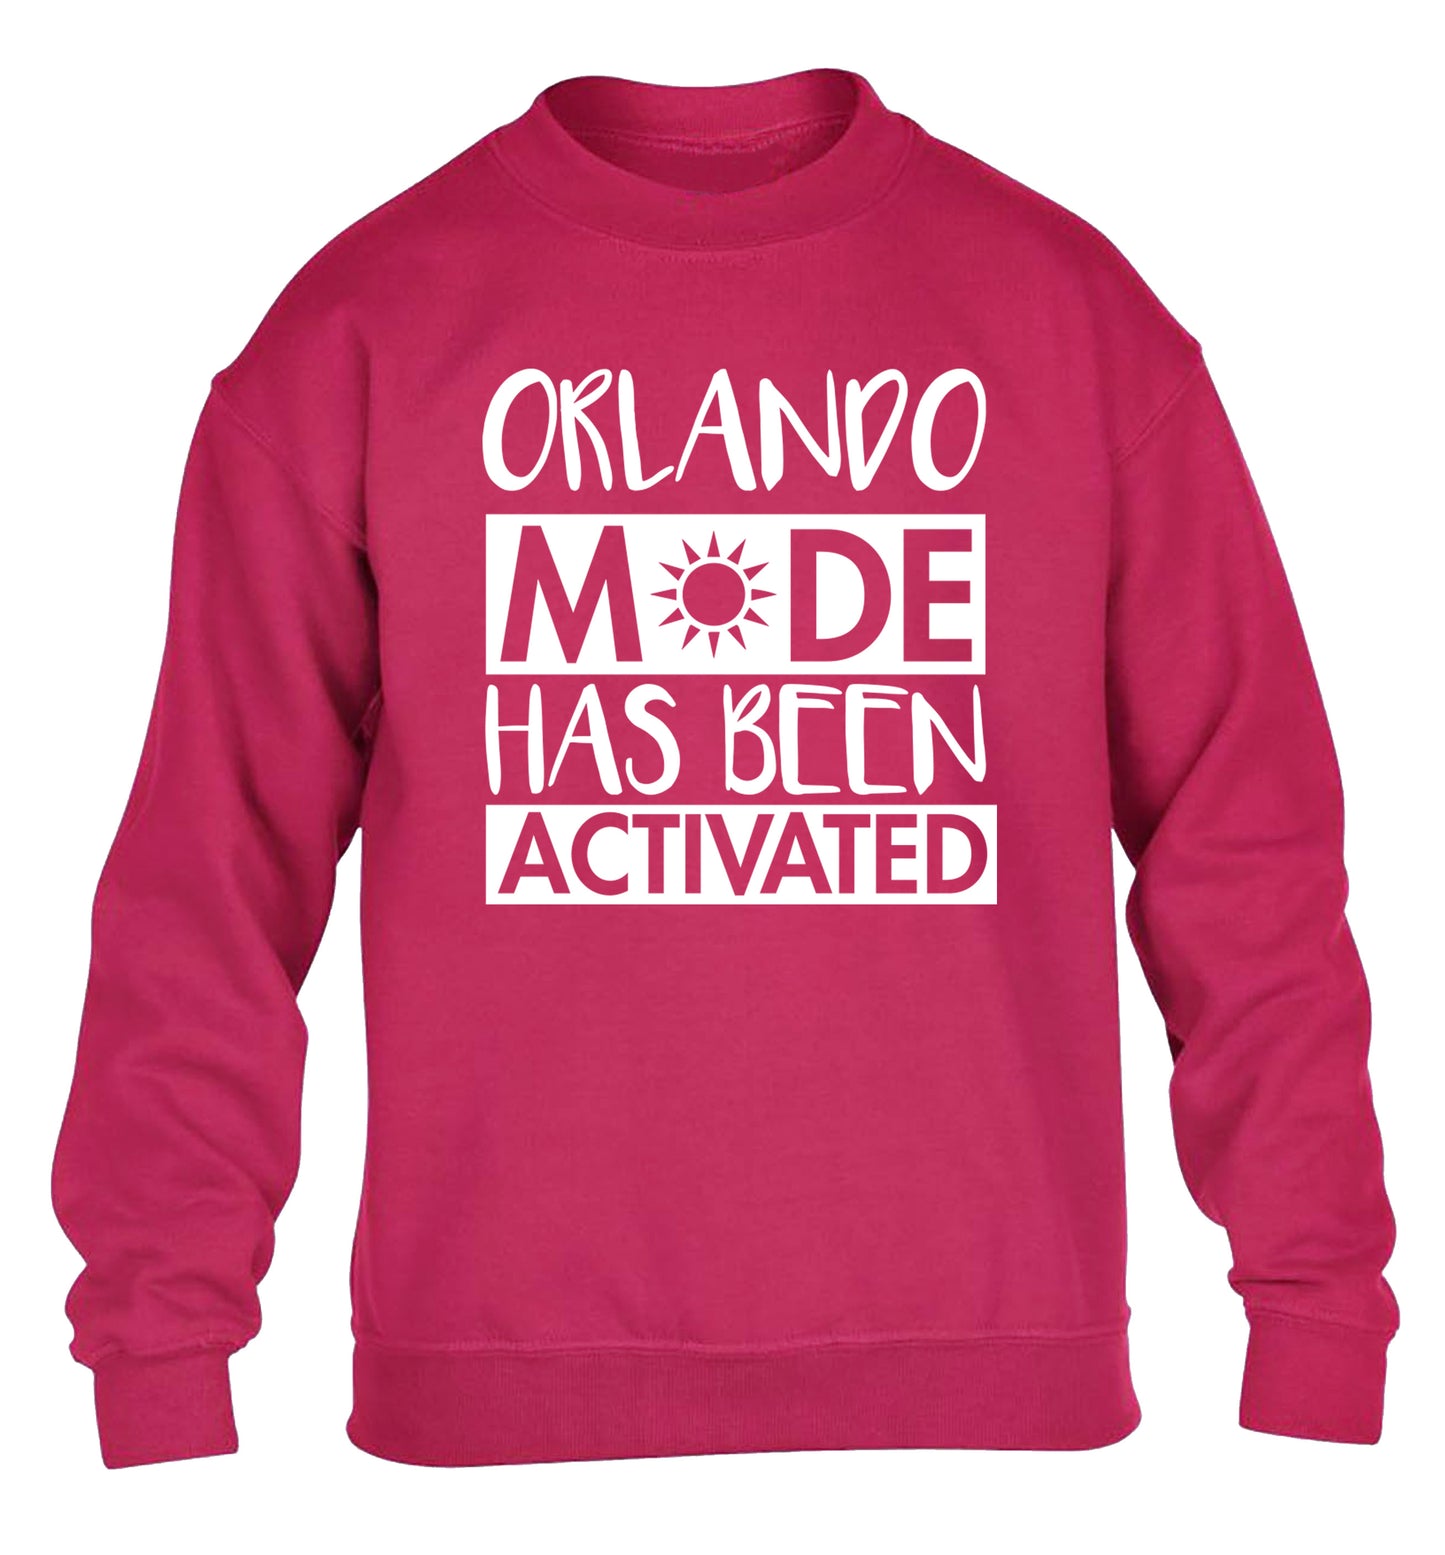 Orlando mode has been activated children's pink sweater 12-13 Years